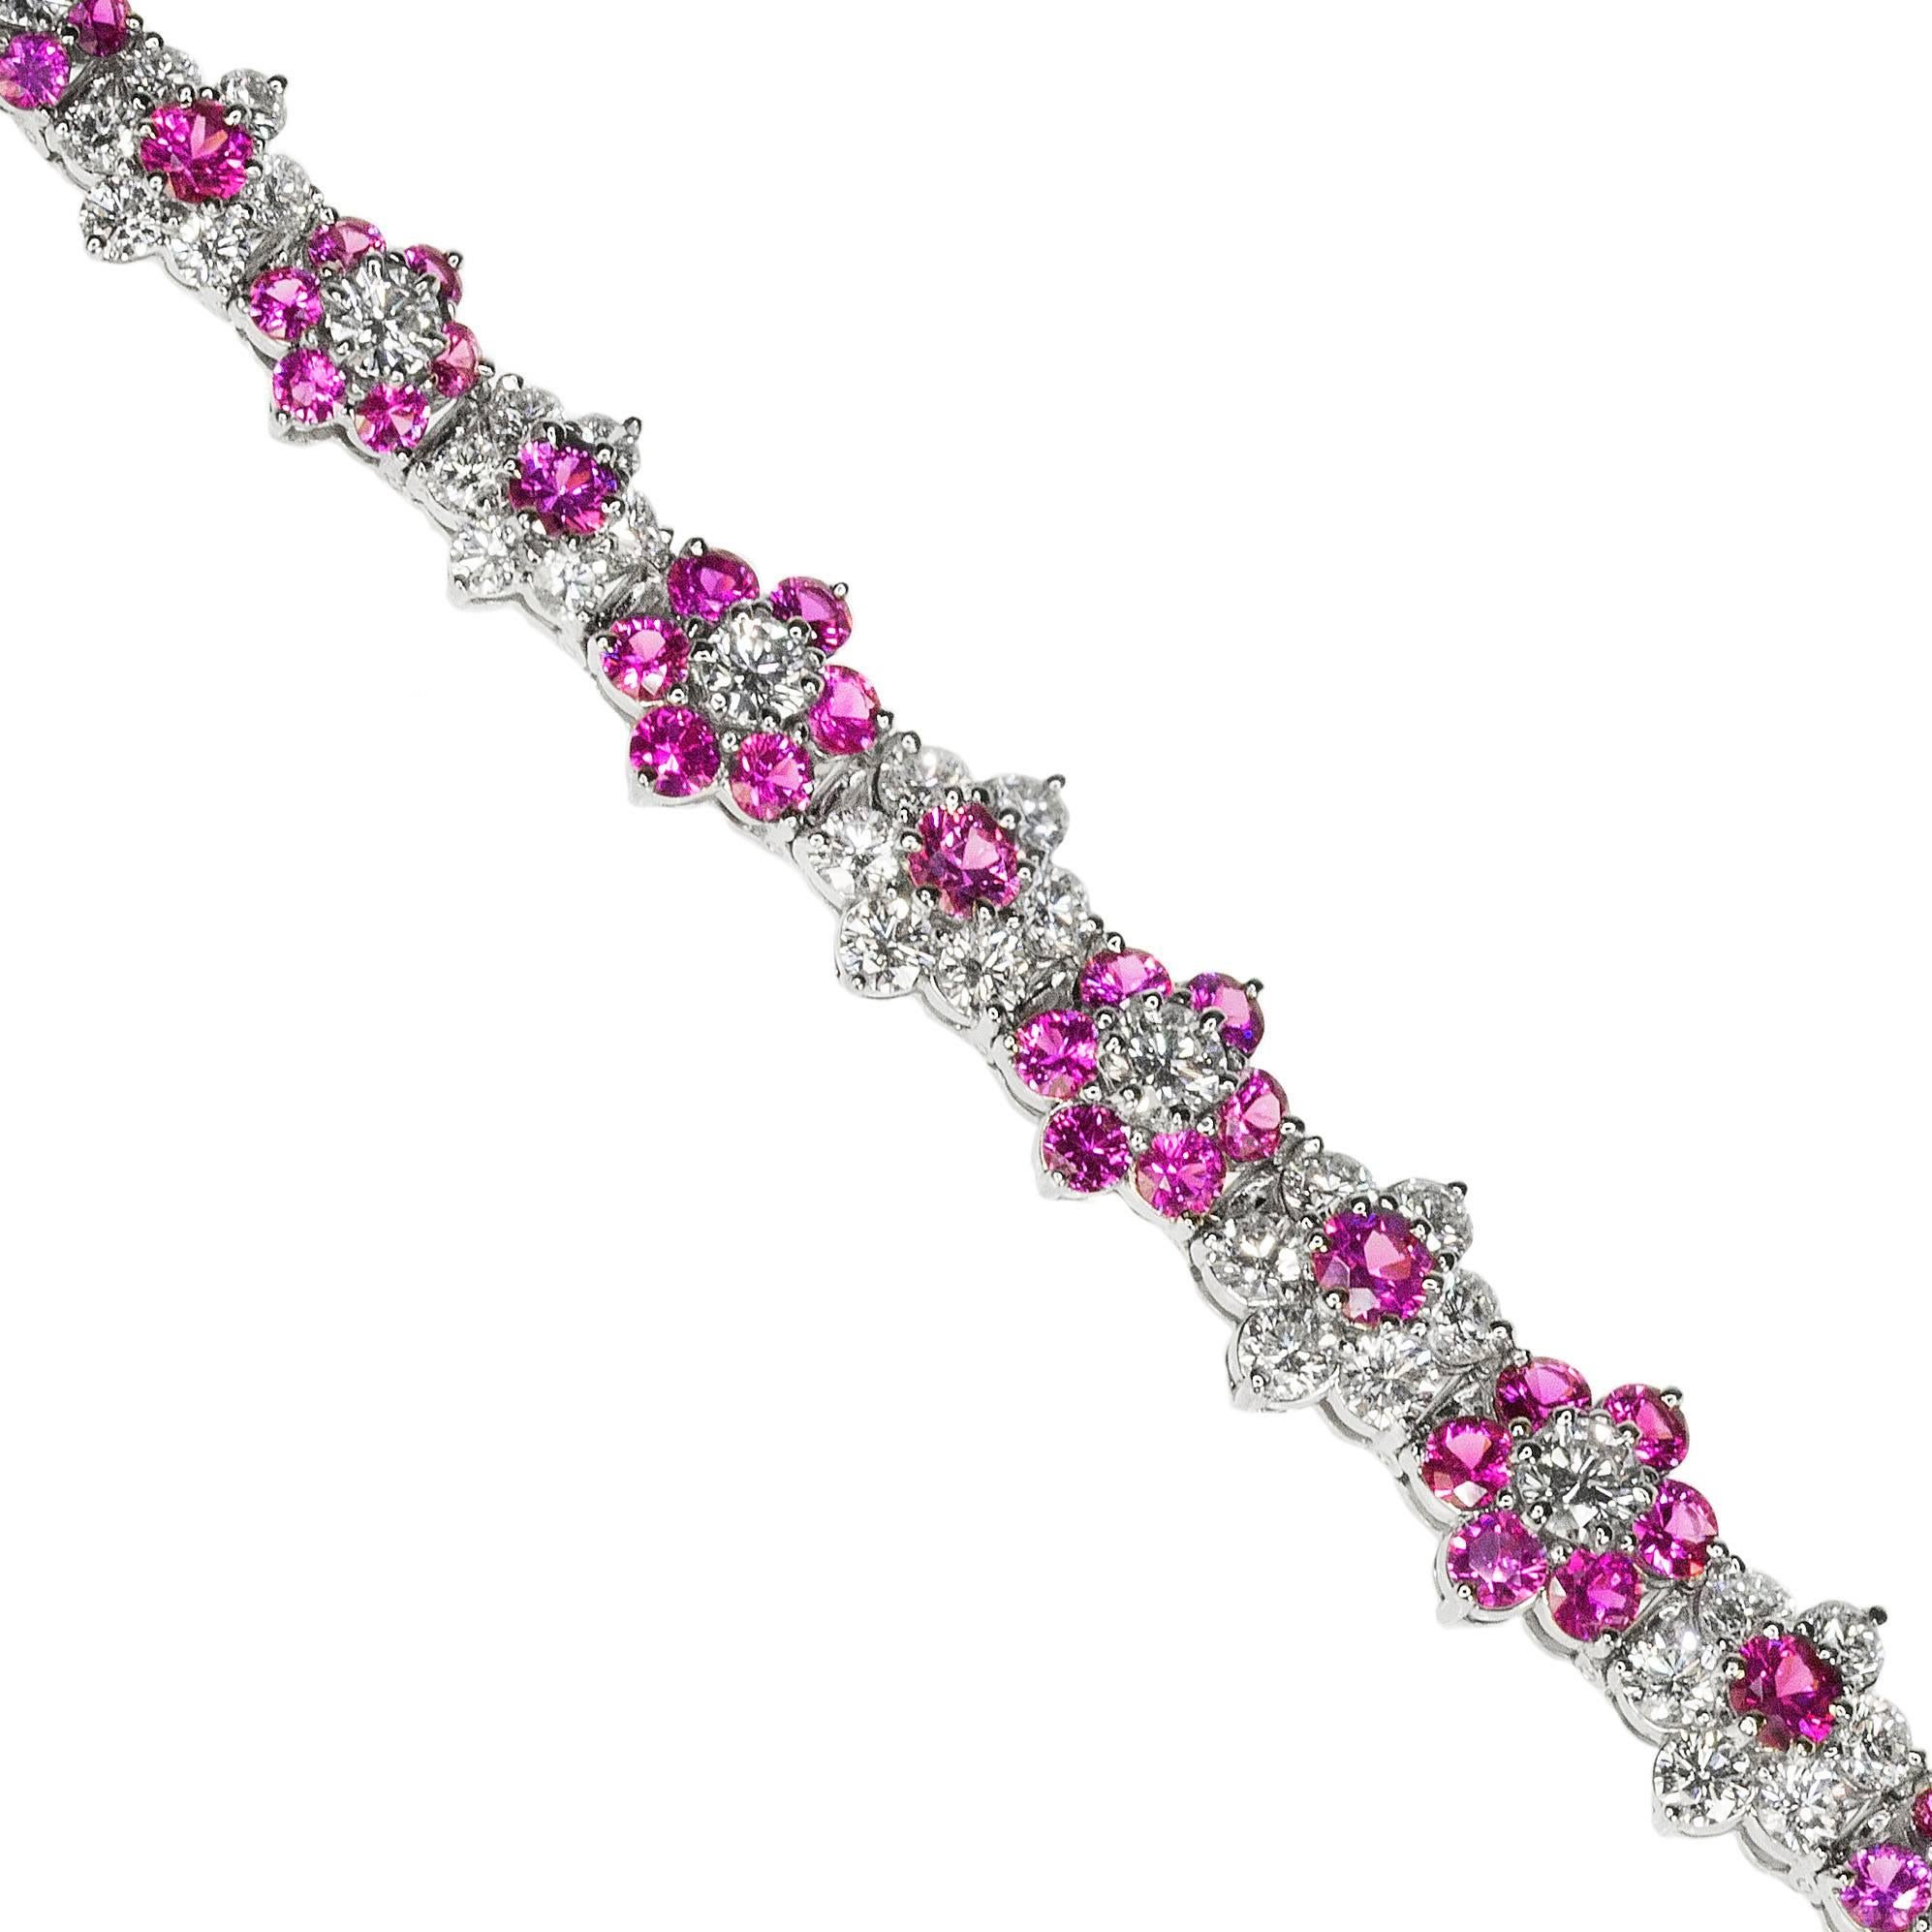 Platinum Oscar Heyman Bracelet containing 77 modern round brilliant diamonds weighing 12.10 carats and 77 hot pink sapphires weighing 18.15 carats. Bracelet is 8 3/4 inches long so could fit a large wrist or could make a pair of earrings out of the